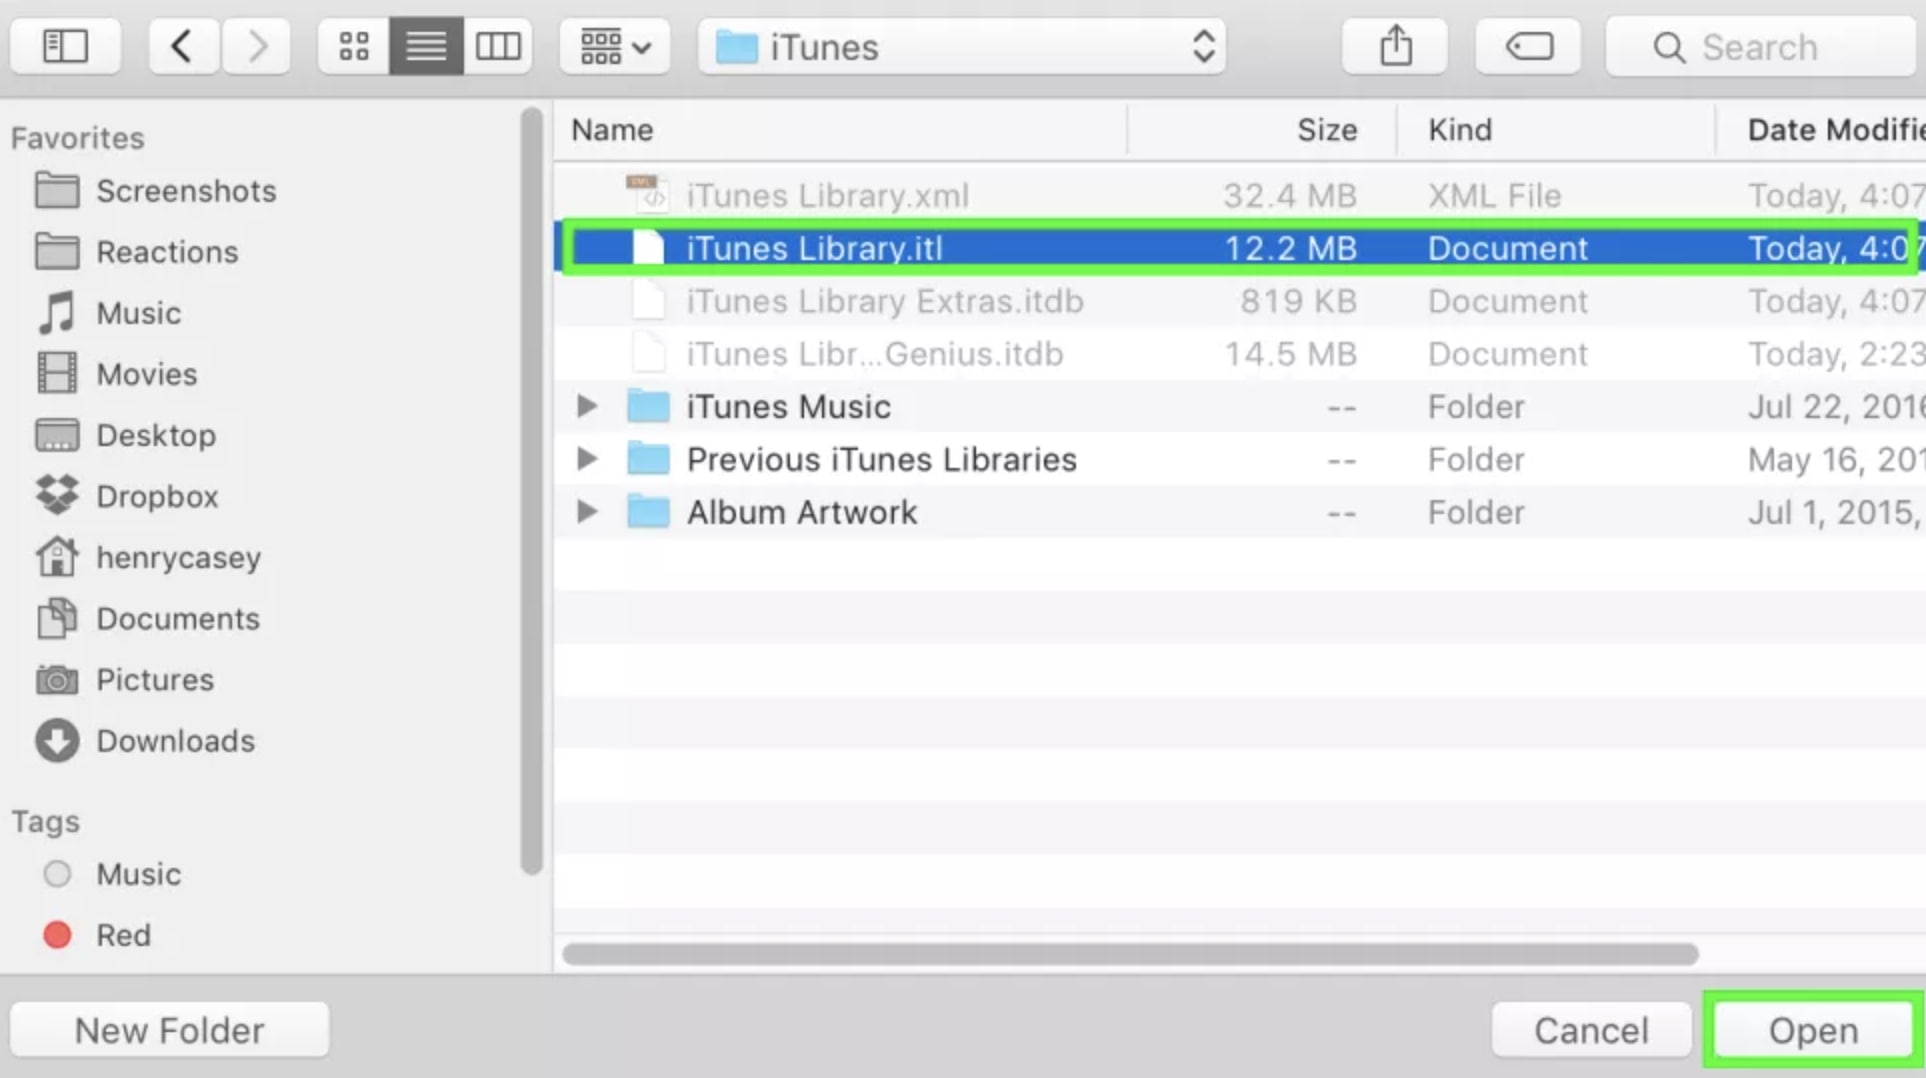  iTunes-reset-library-sort-out-upload-library 